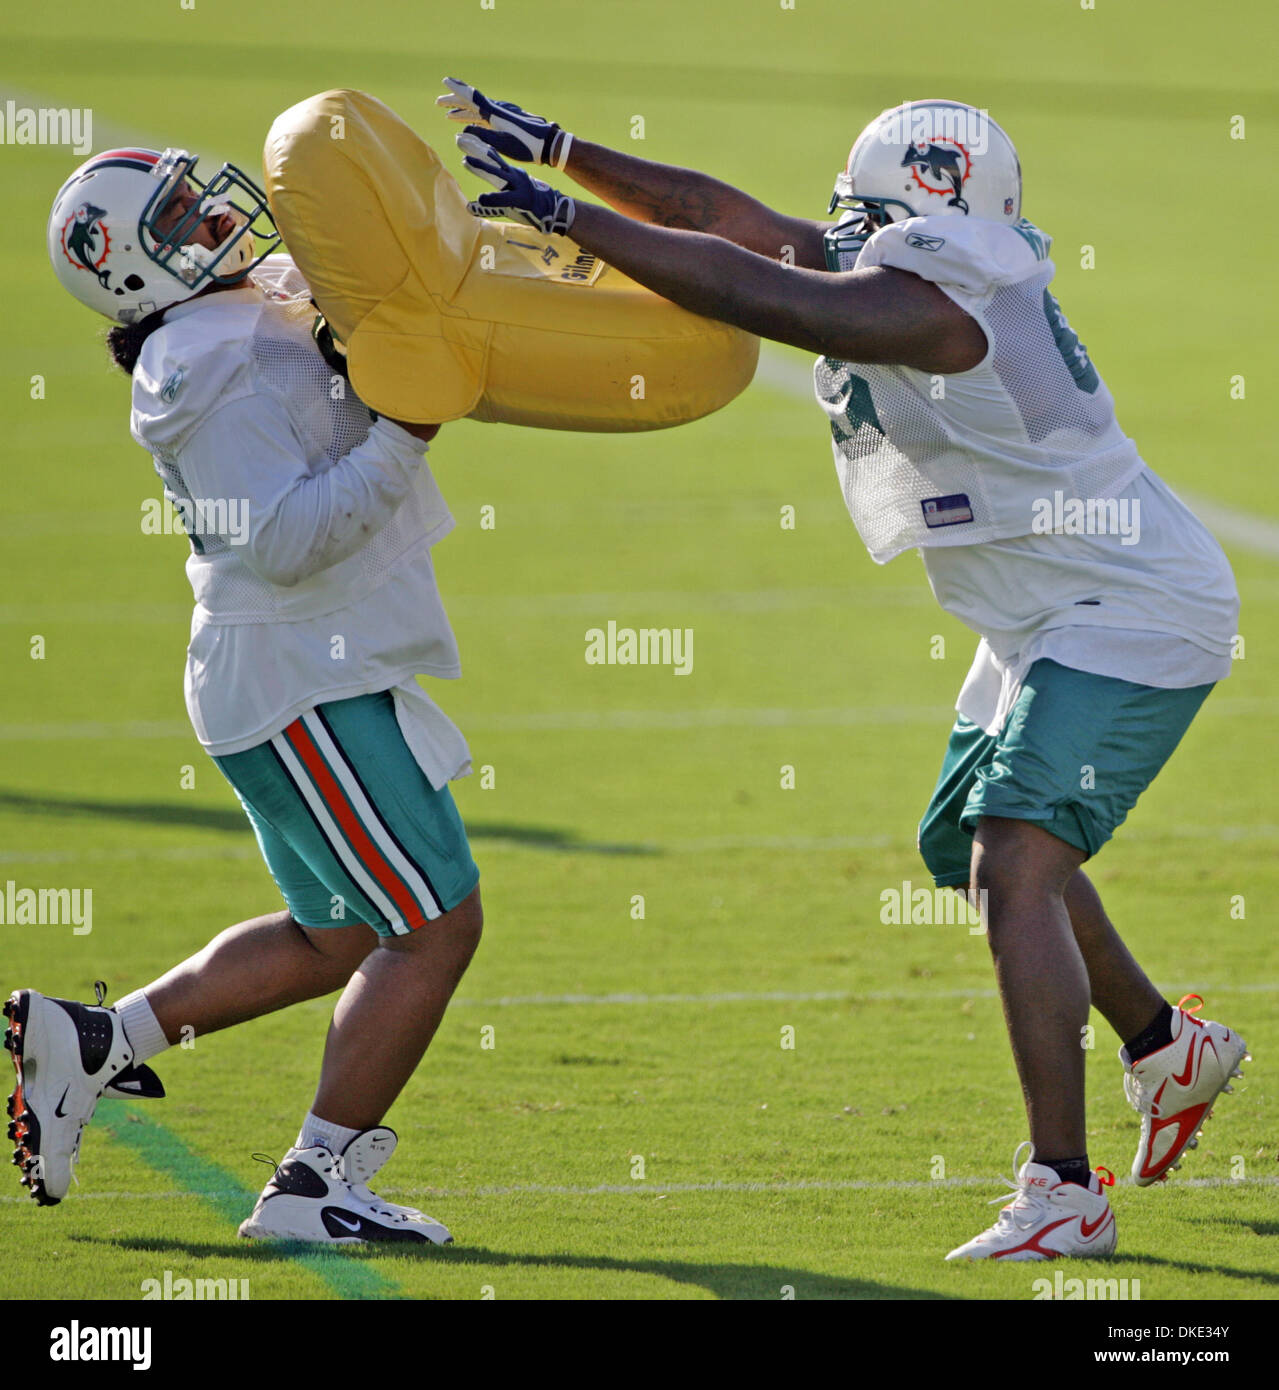 Jul 28, 2007 - Davie, FL, USA - Dolphins linemen SAMSON SATELE (left) and JULIUS WILSON take part in a drill on the first day of traininng camp. (Credit Image: © Allen Eyestone/Palm Beach Post/ZUMA Press) RESTRICTIONS: USA Tabloid RIGHTS OUT! Stock Photo